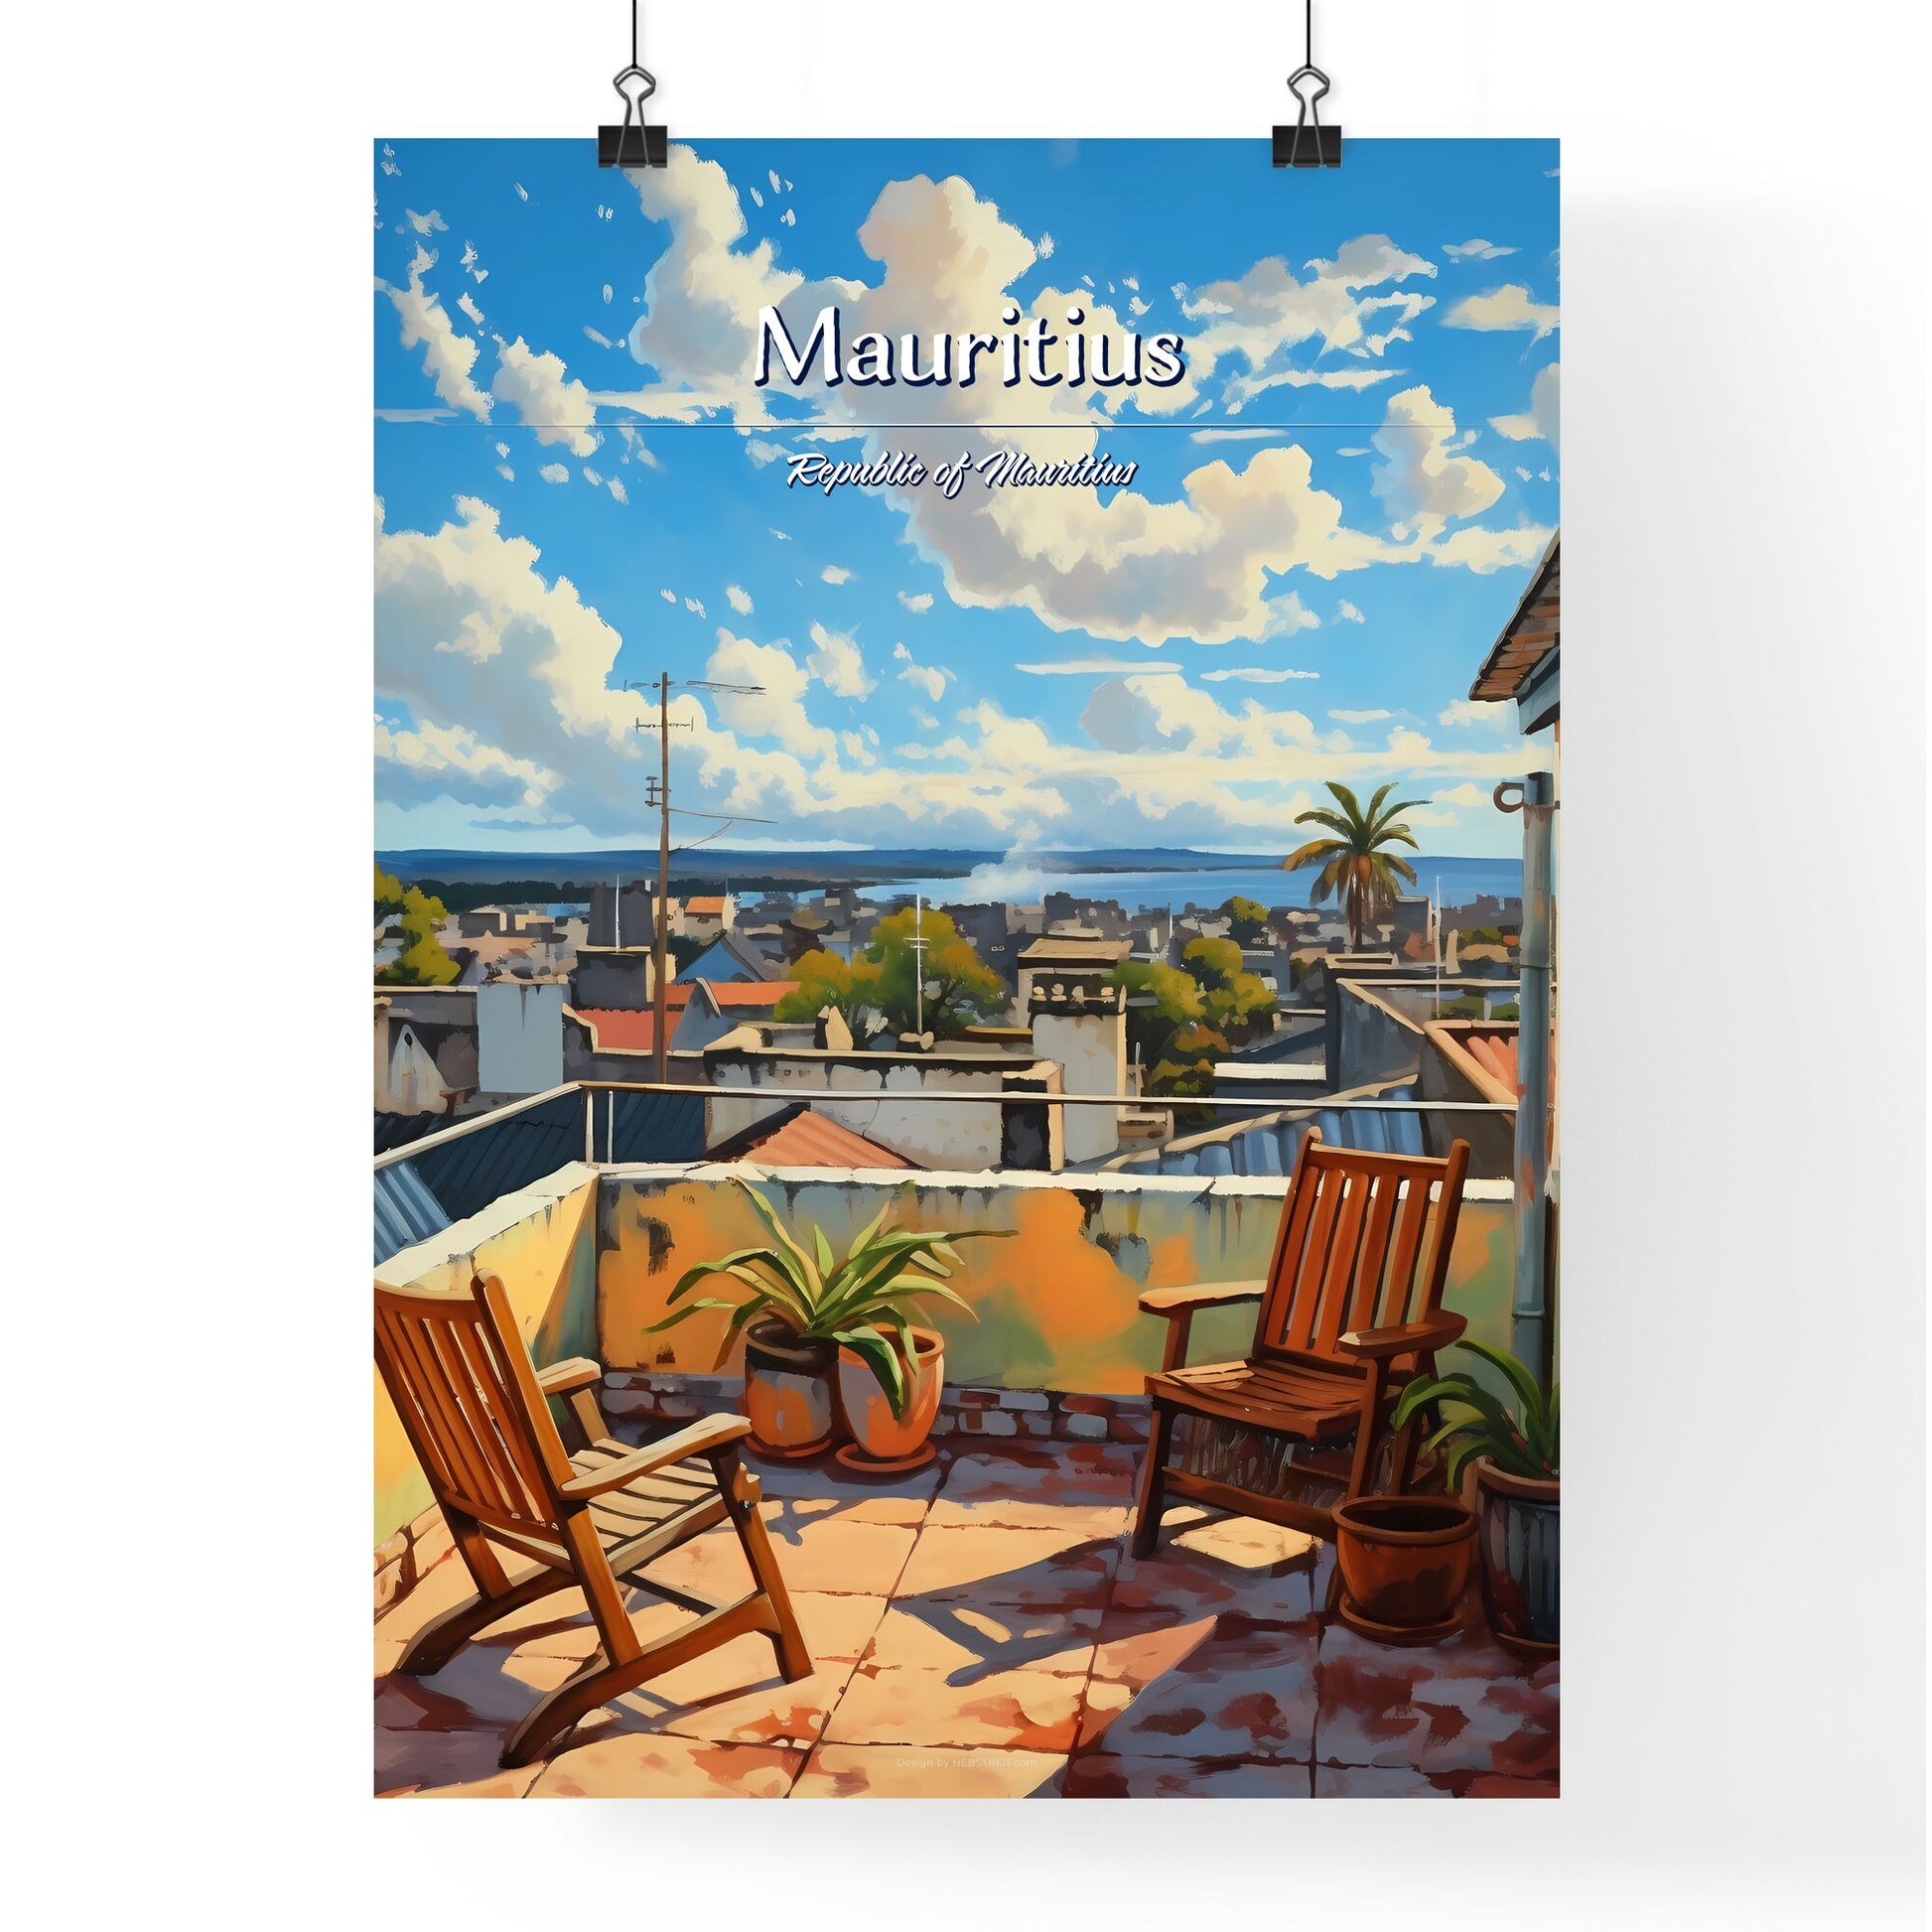 On the roofs of Mauritius, Republic of Mauritius - Art print of chairs on a rooftop overlooking a city Default Title